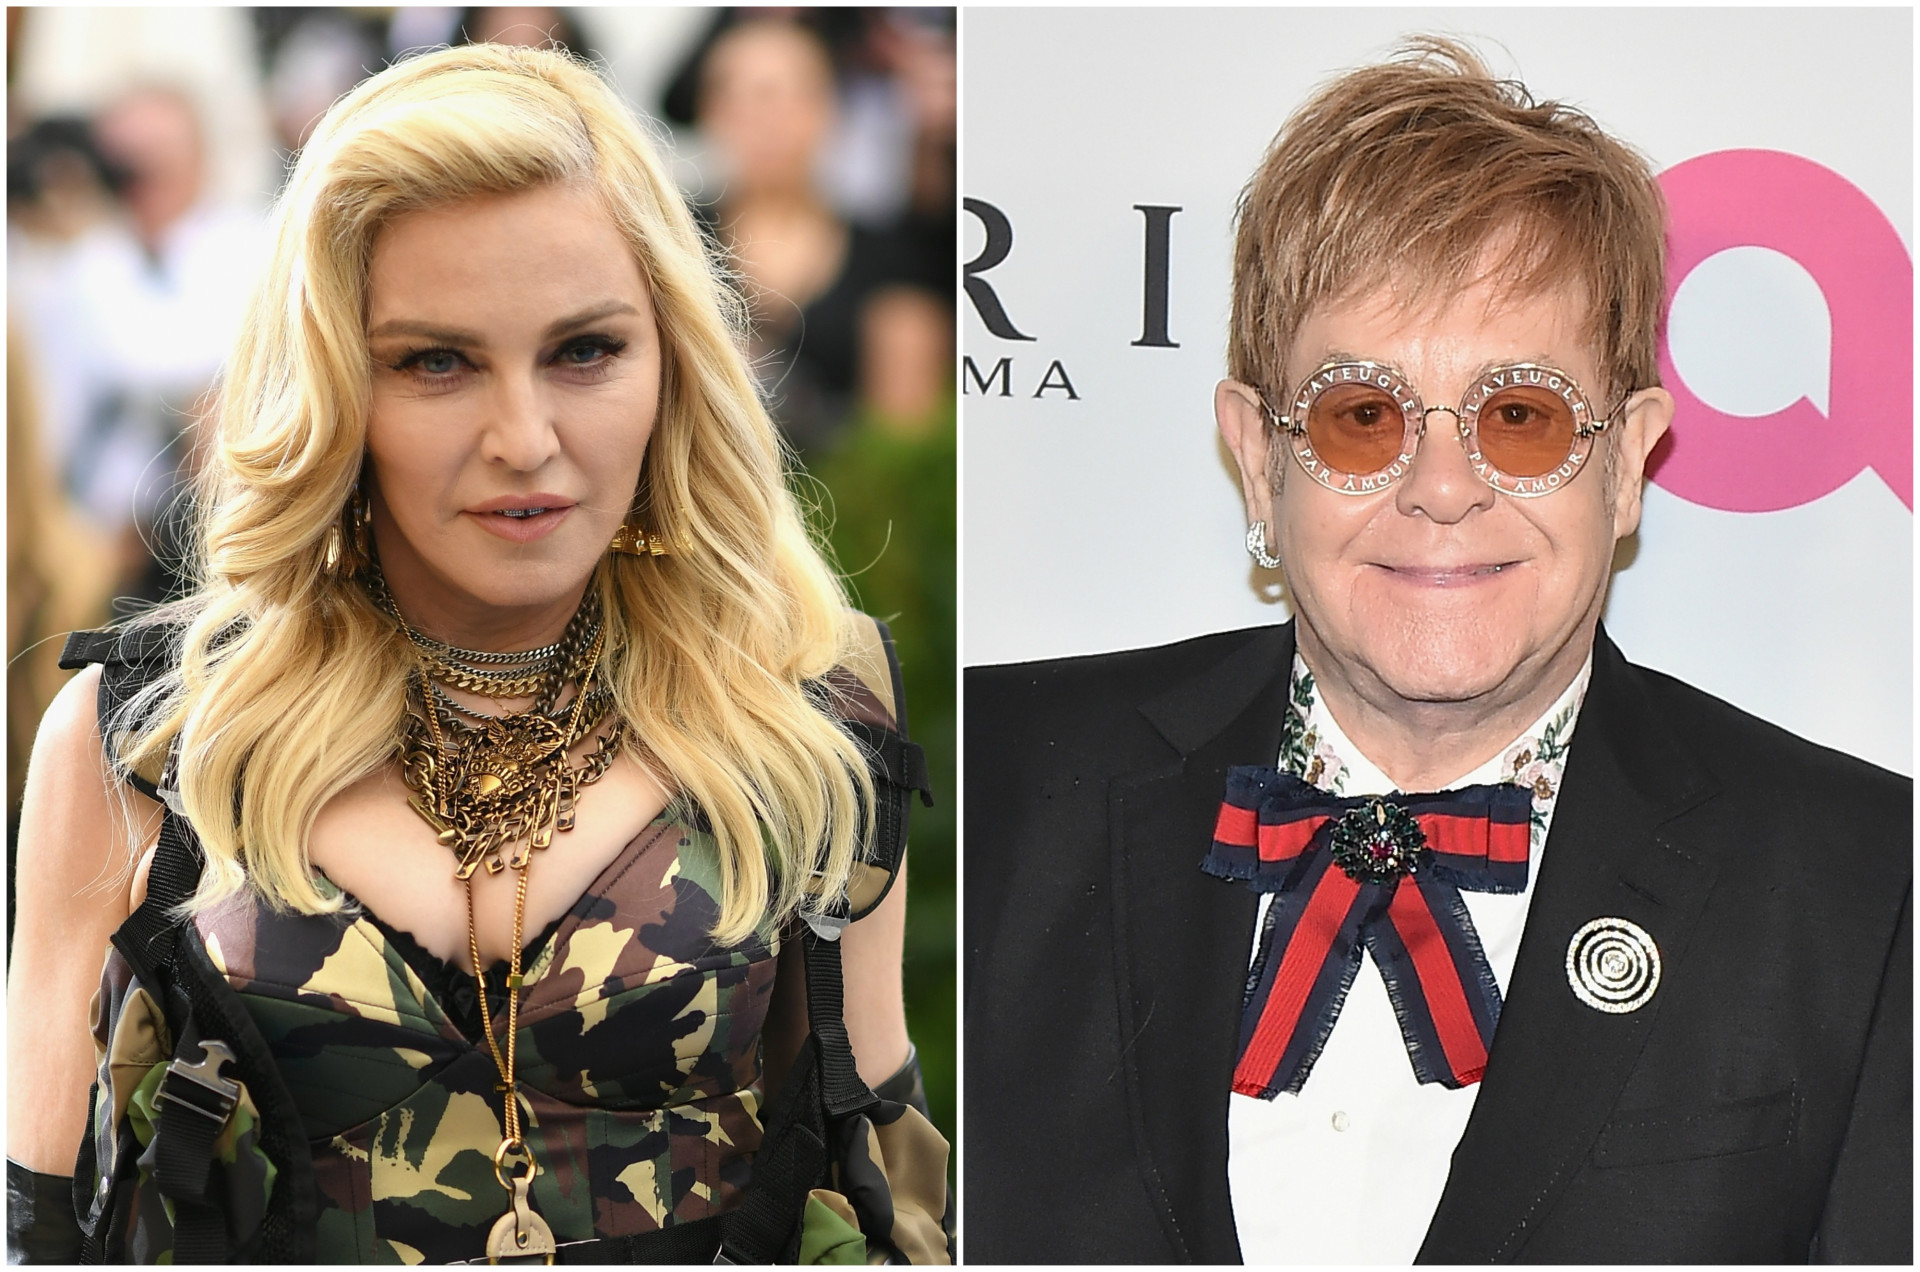 <p>Elton John reportedly claimed that Madonna had no shot at winning the Best Live Act award at the Q Awards. His remarks sparked anger in the singer, leading to a feud between the two.</p><p><a href="https://www.msn.com/en-us/community/channel/vid-7xx8mnucu55yw63we9va2gwr7uihbxwc68fxqp25x6tg4ftibpra?cvid=94631541bc0f4f89bfd59158d696ad7e">Follow us and access great exclusive content every day</a></p>